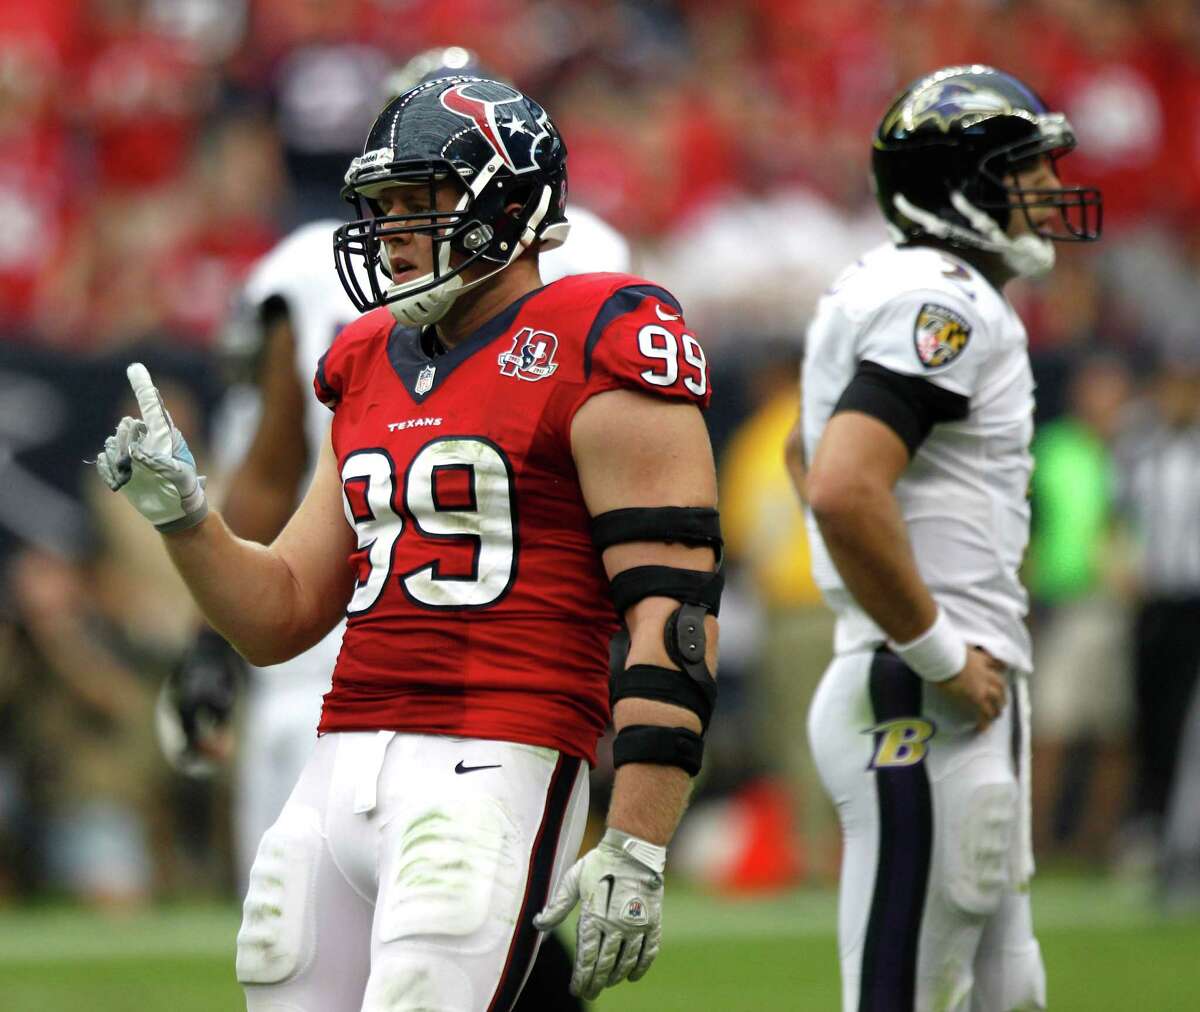 Texans defensive end J.J. Watt started coming on late as a rookie, and he's carried it over to this season, quickly developing into one of the NFL's best linemen.